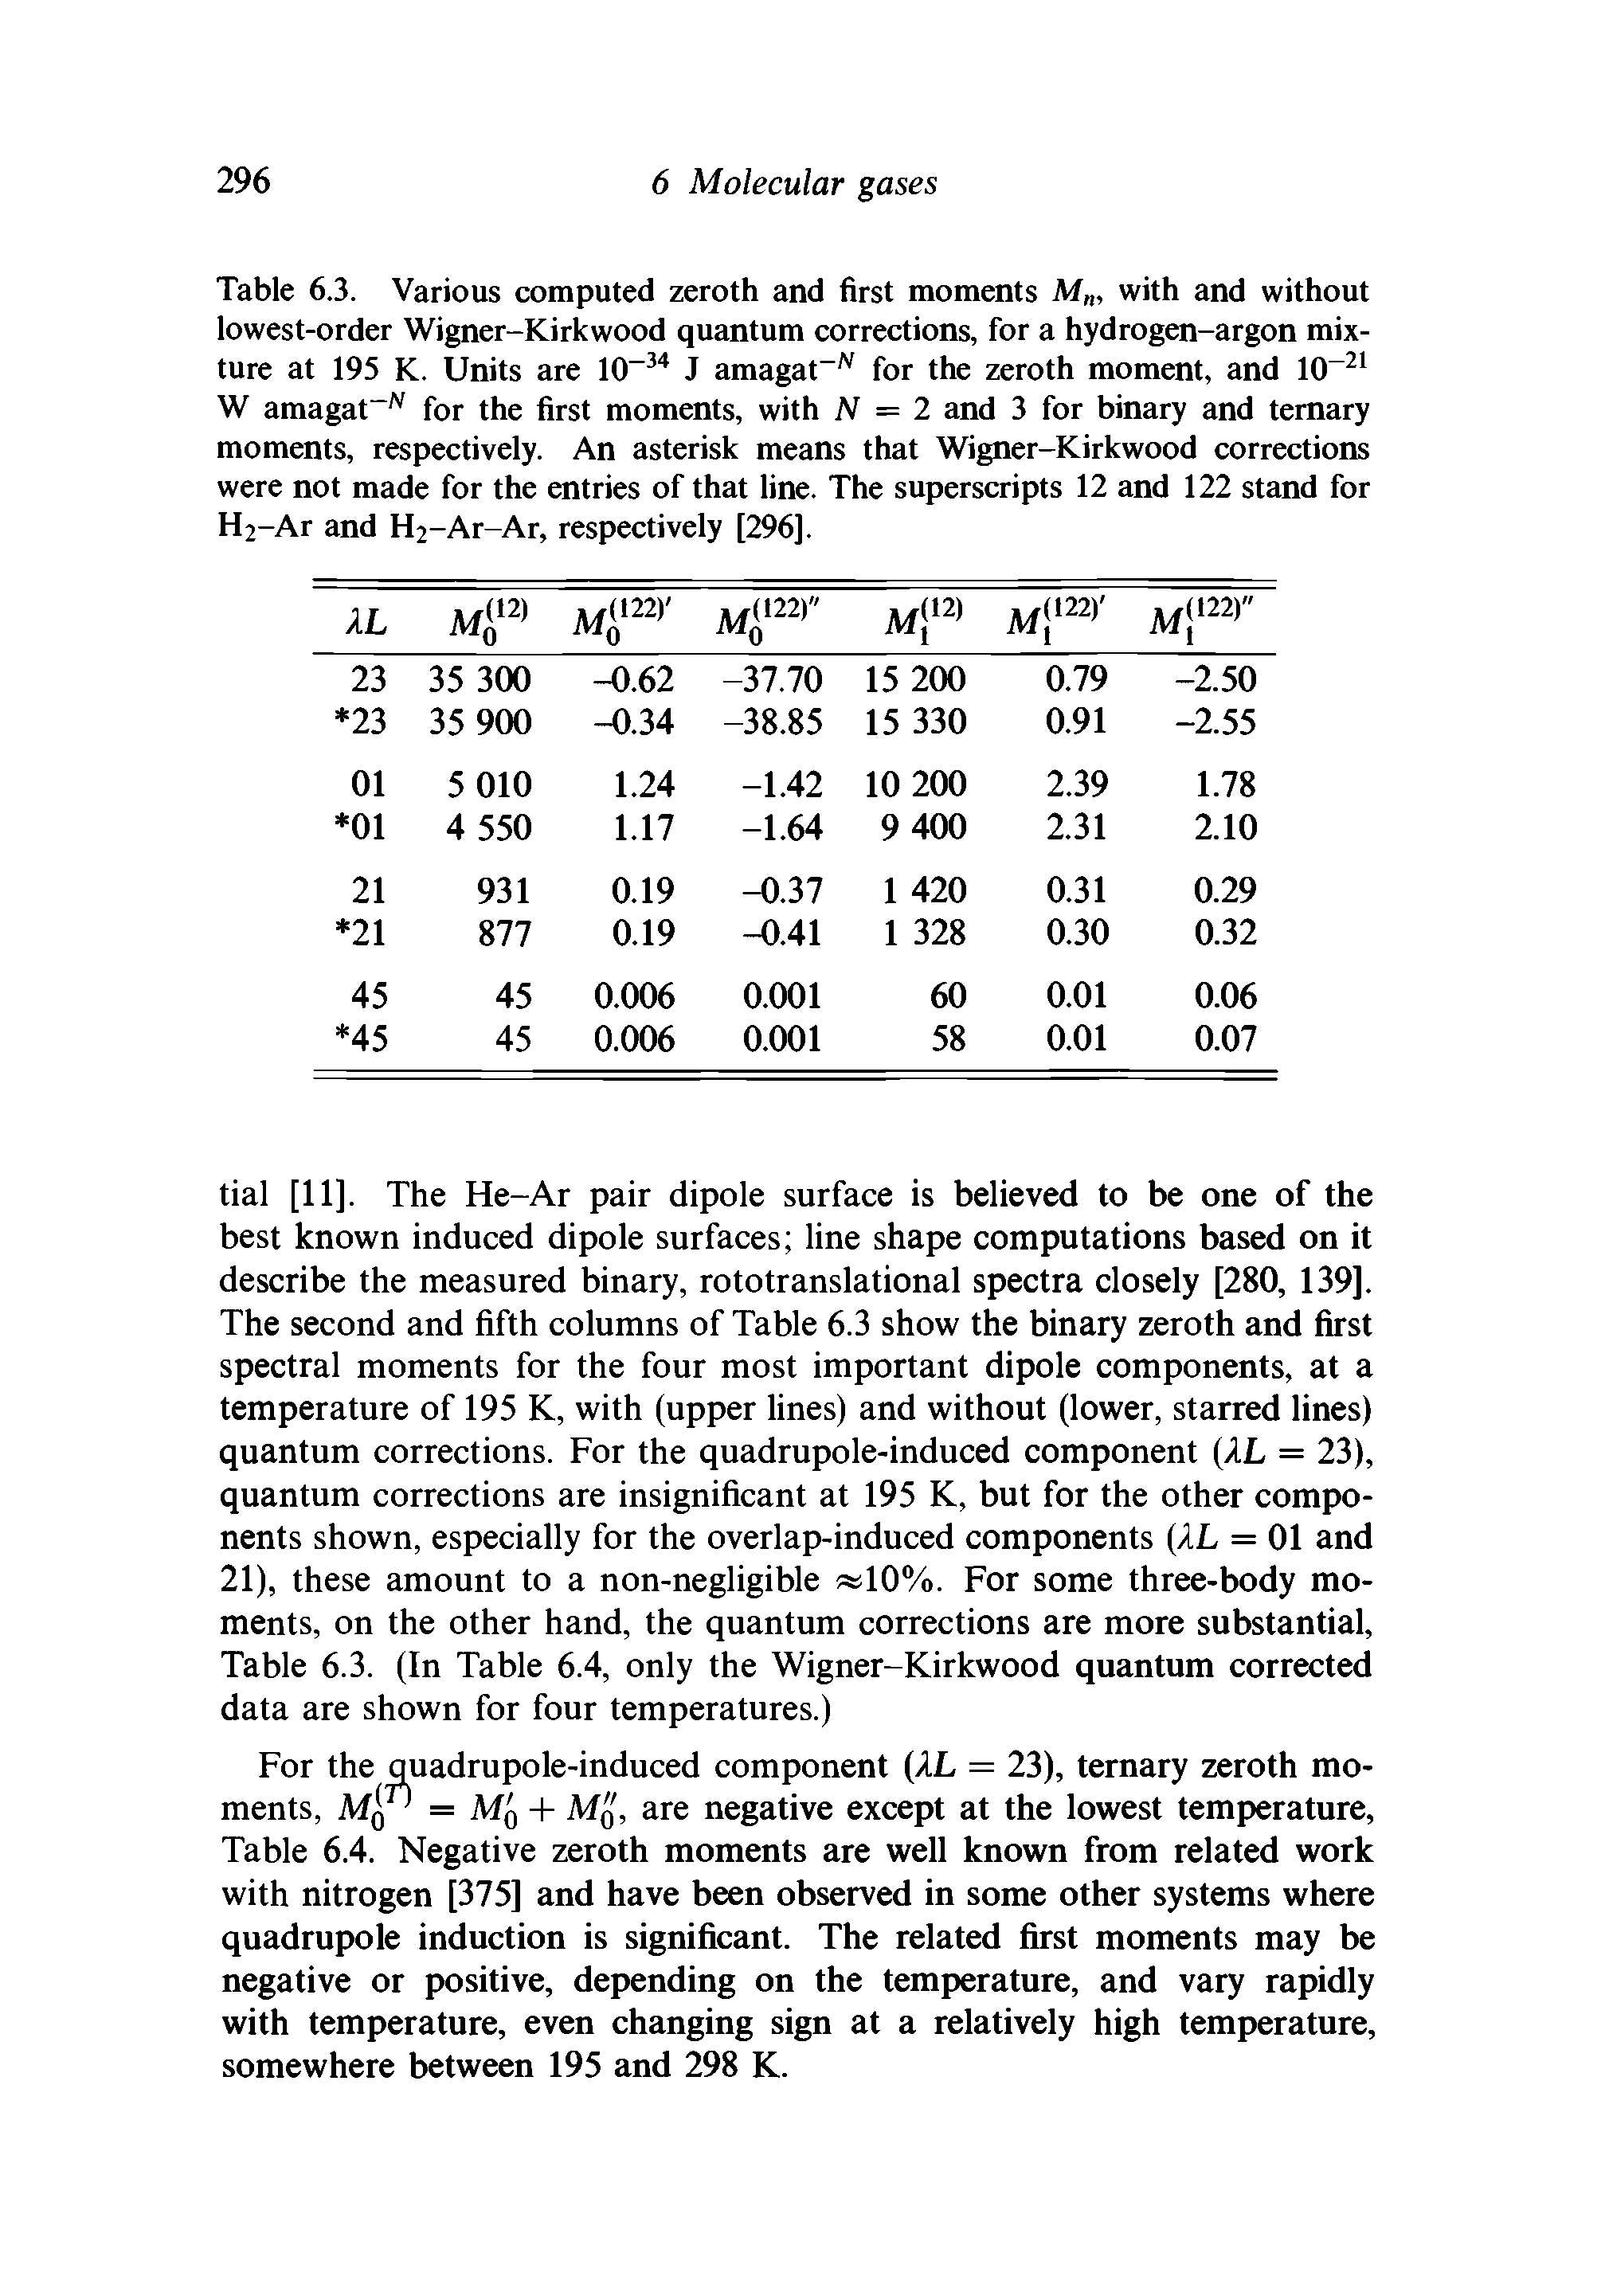 Table 6.3. Various computed zeroth and first moments M , with and without lowest-order Wigner-Kirkwood quantum corrections, for a hydrogen-argon mixture at 195 K. Units are 10-34 J amagat-N for the zeroth moment, and 10-21 W amagat N for the first moments, with N = 2 and 3 for binary and ternary moments, respectively. An asterisk means that Wigner-Kirkwood corrections were not made for the entries of that line. The superscripts 12 and 122 stand for H2-Ar and H2-Ar-Ar, respectively [296].